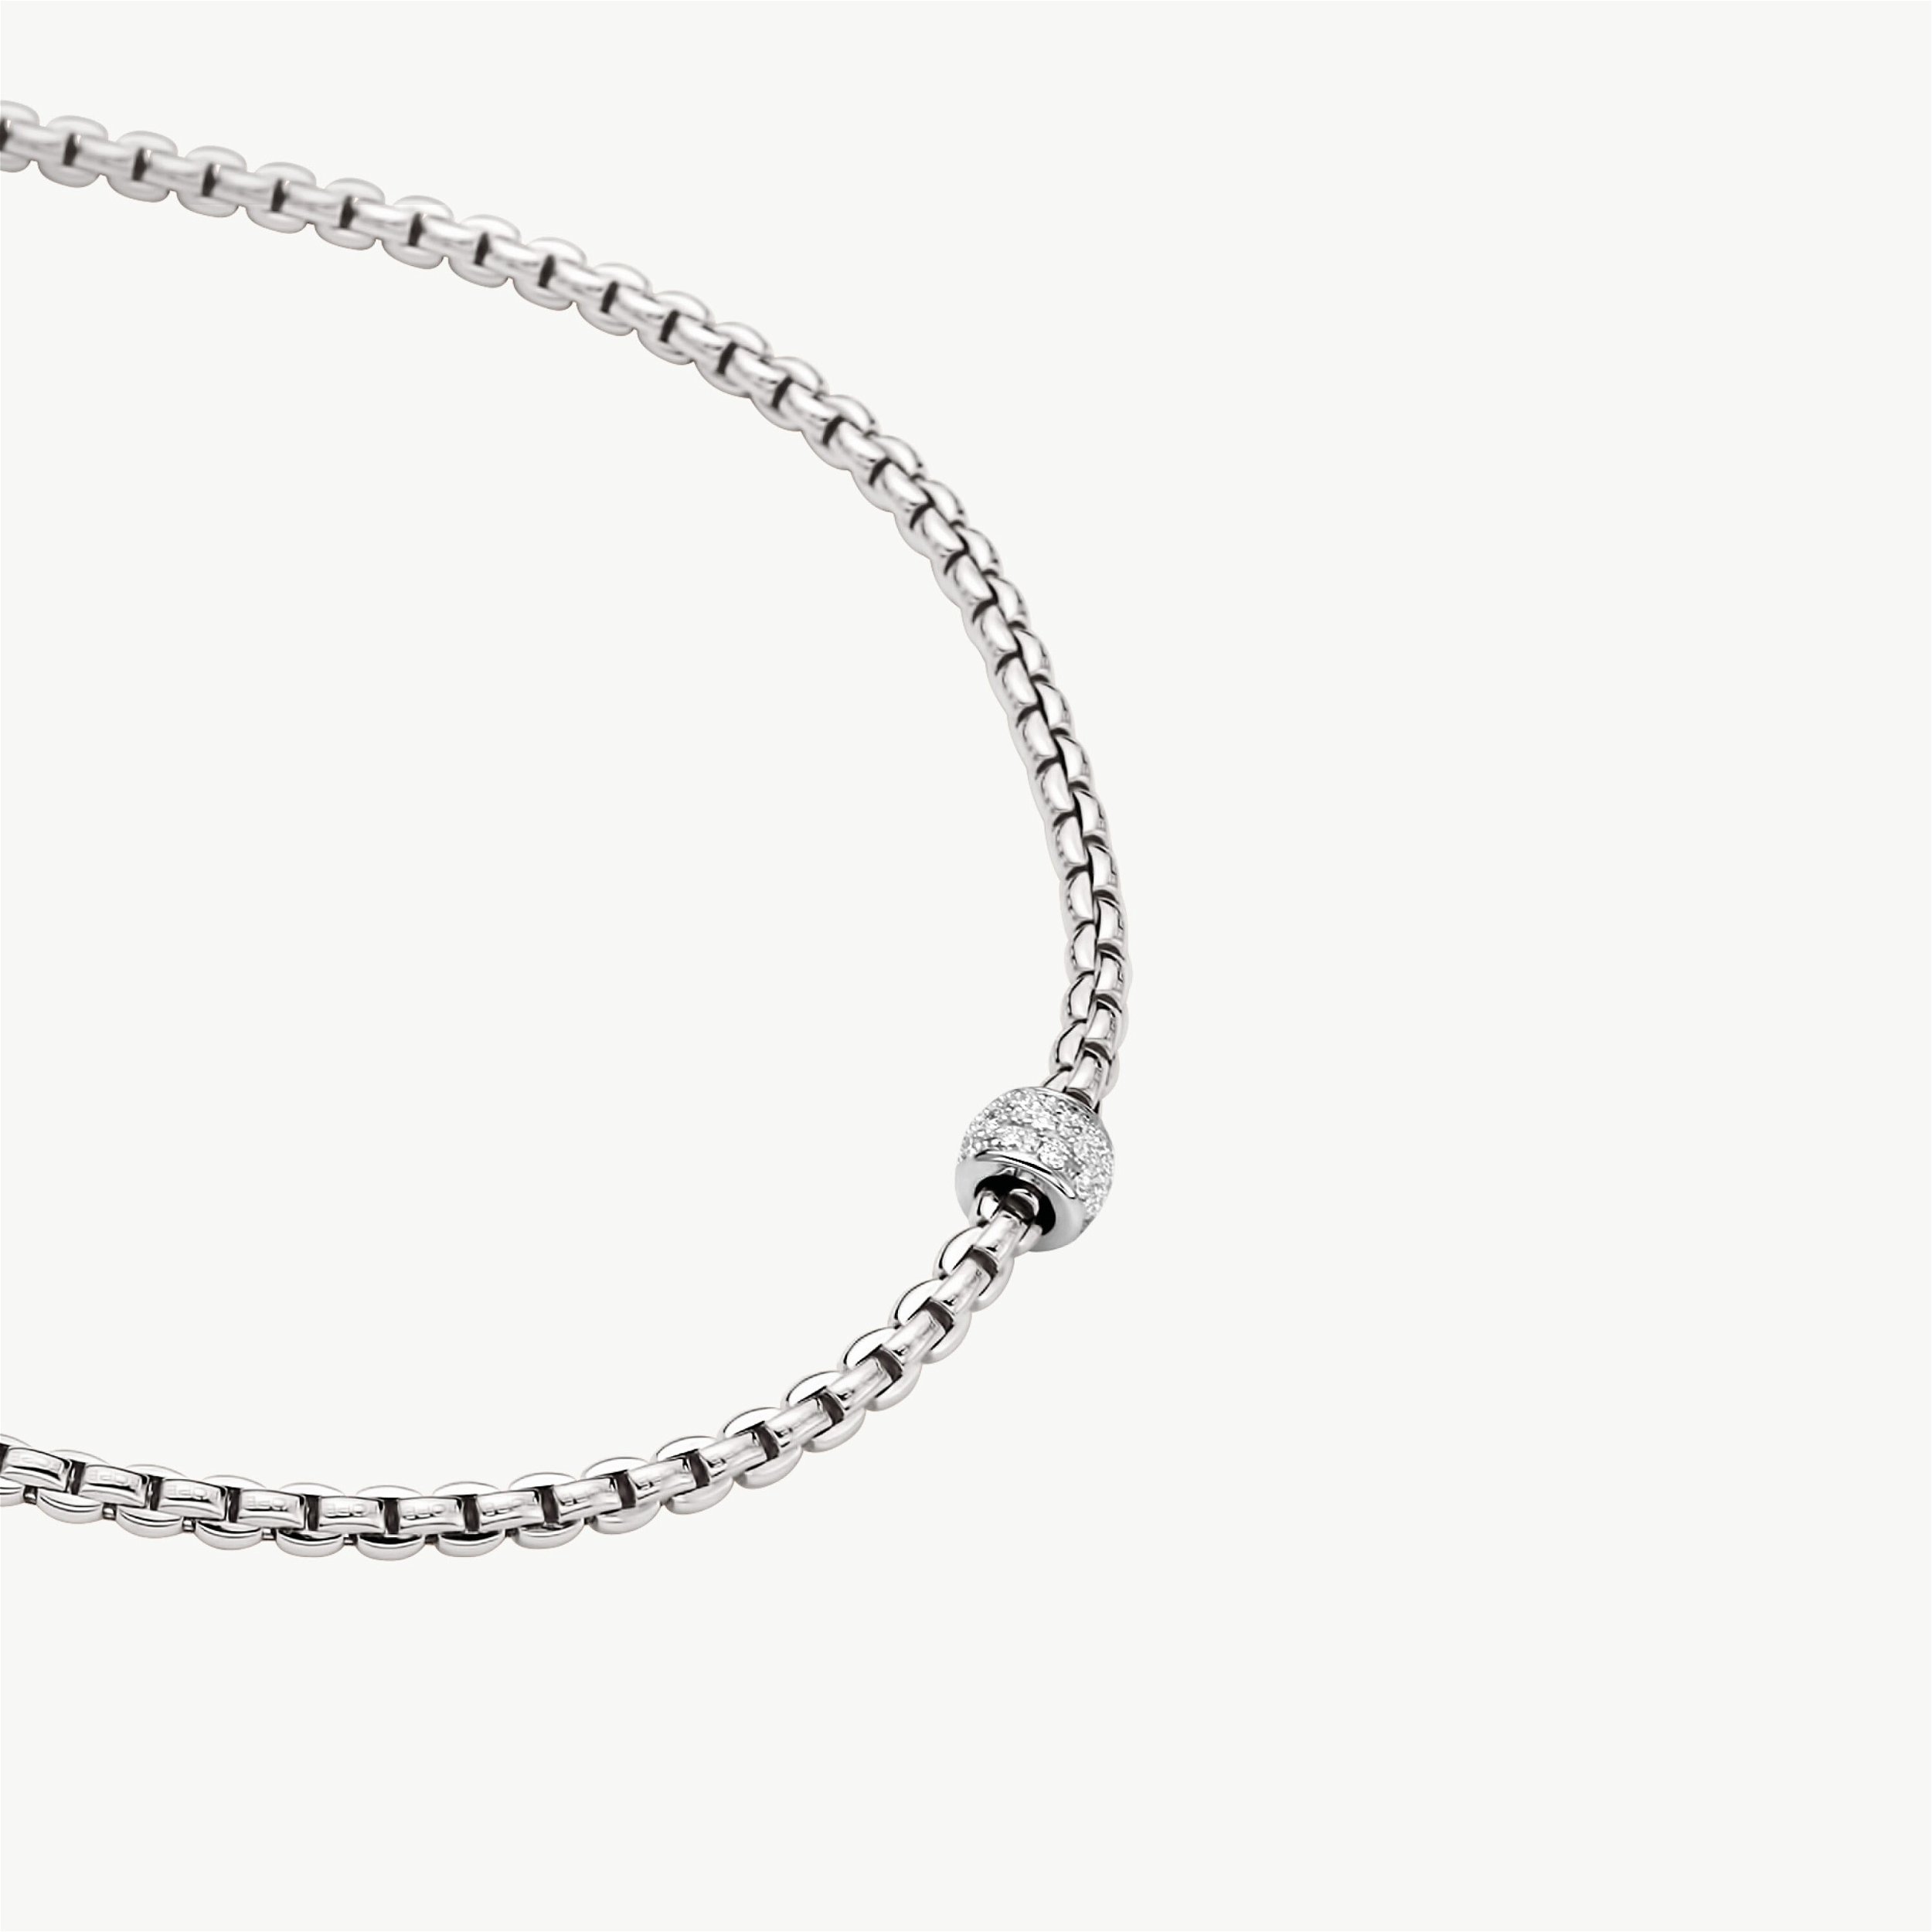 Eka Tiny Collection Rope Necklace in 18kt White Gold with White Gold and White Diamond Element - 3mm - 50cm